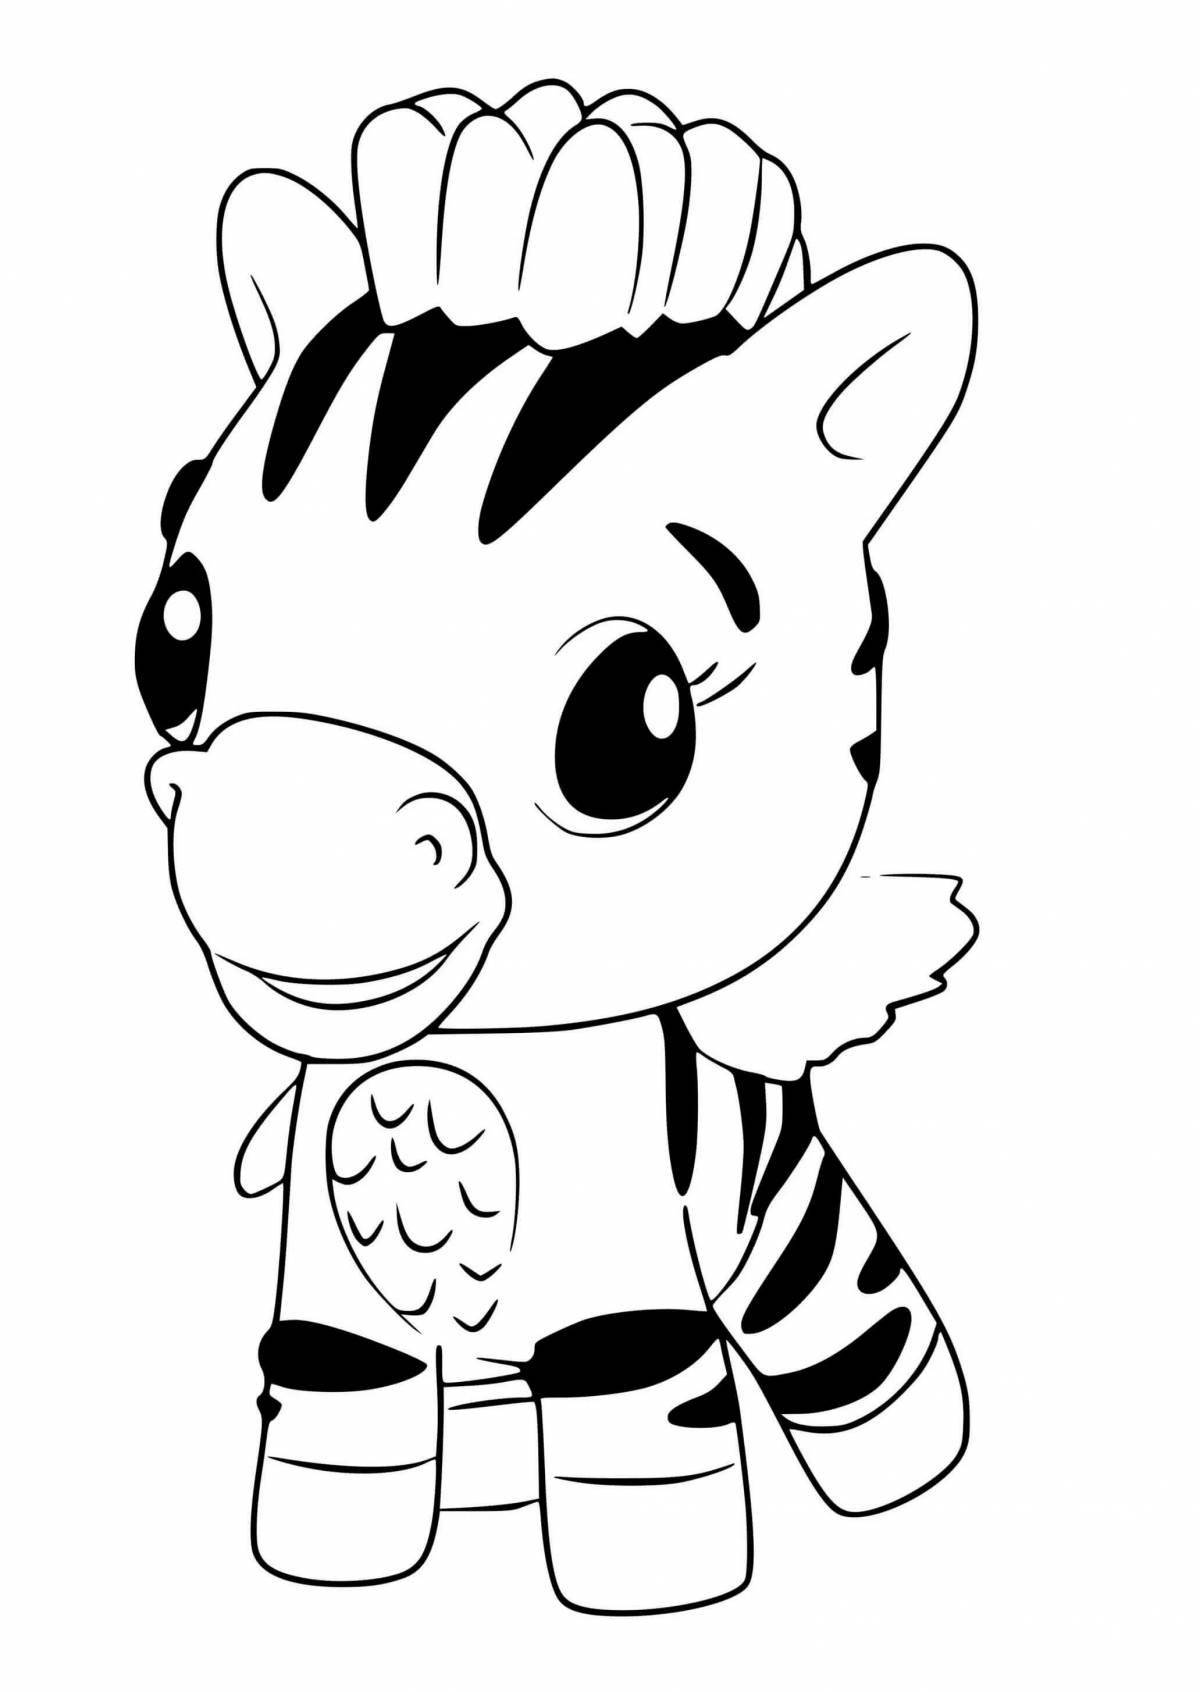 Coloring page adorable hechimolas